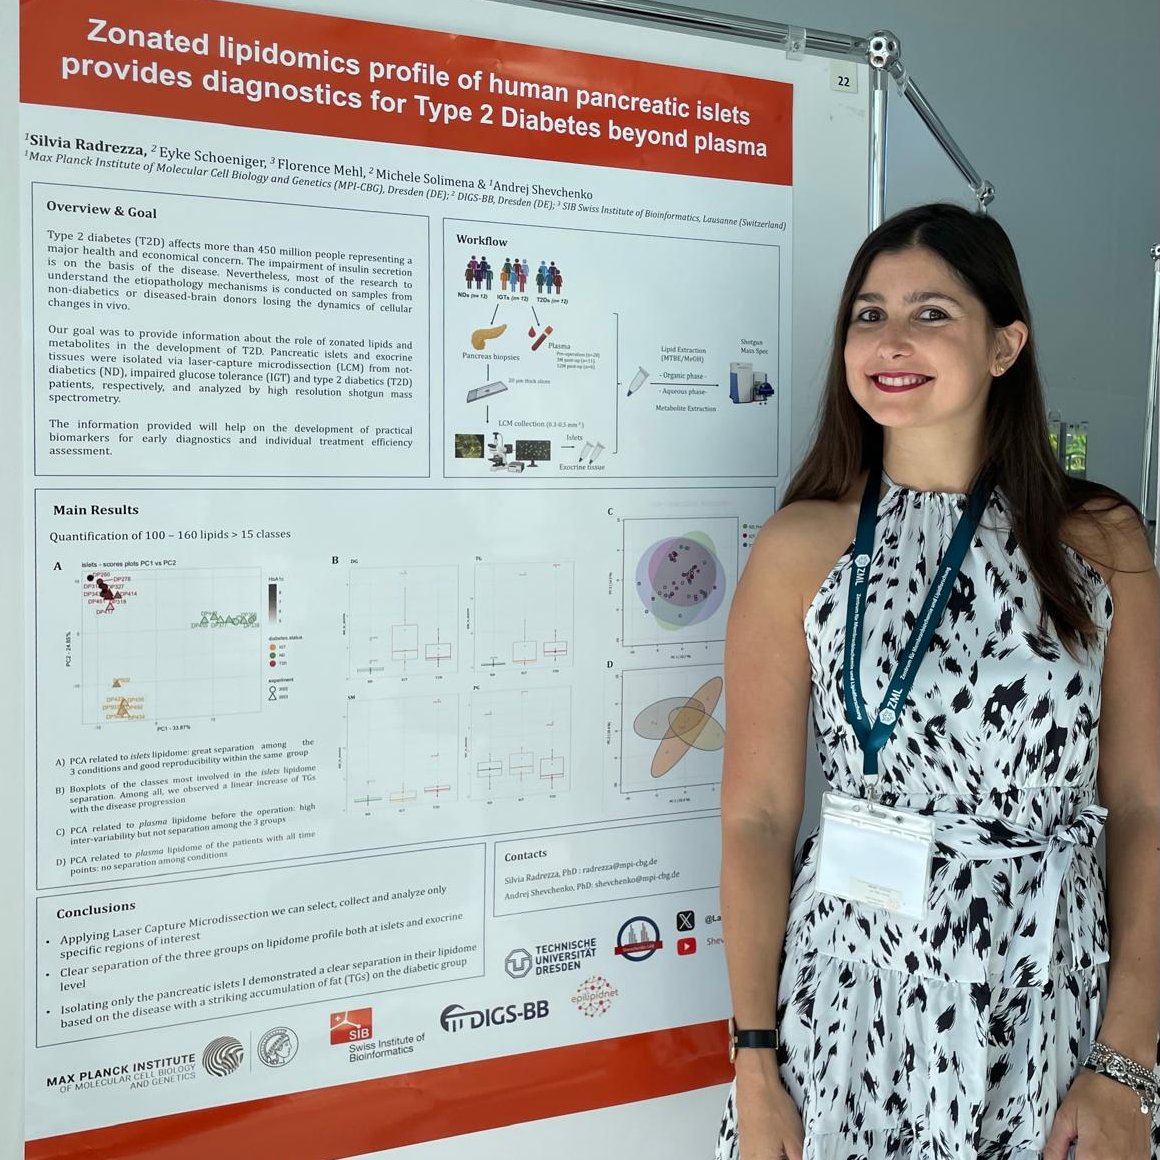 🌹Lipid science is feminine: cleaver, young and handsome! Our #postdoc Silvia Radrezza presenting her outstanding project on pancreas lipidomics  @EpiLipidNET Annual Meeting in #Dresden.
#massspec @FemalesInMS #womeninSTEM #clinicalresearch #diabetes #LCM